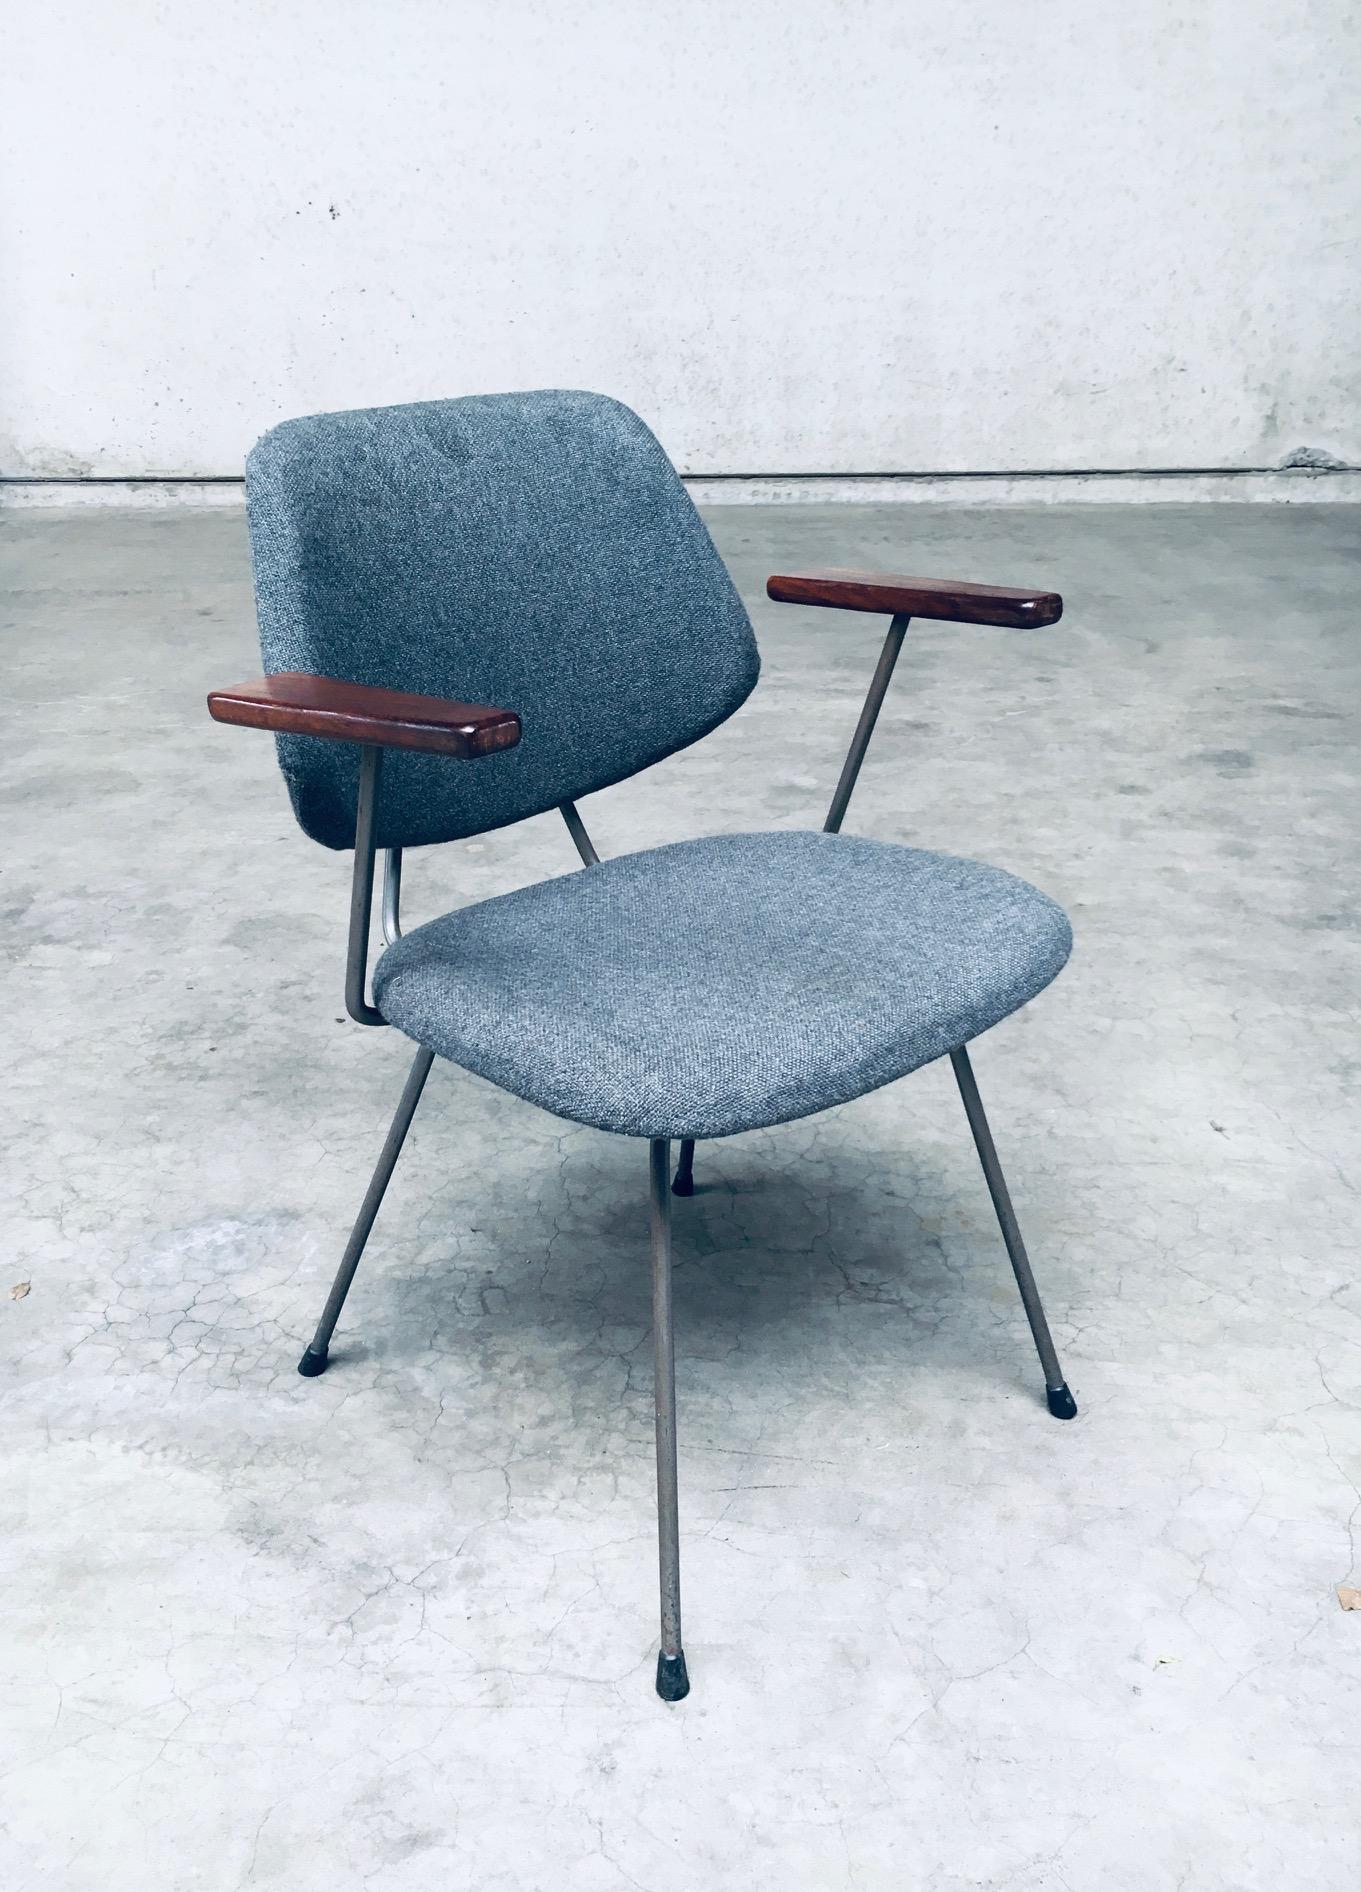 Midcentury Modern Design Office Chair set by Wim Rietveld for Kembo, 1950's For Sale 1